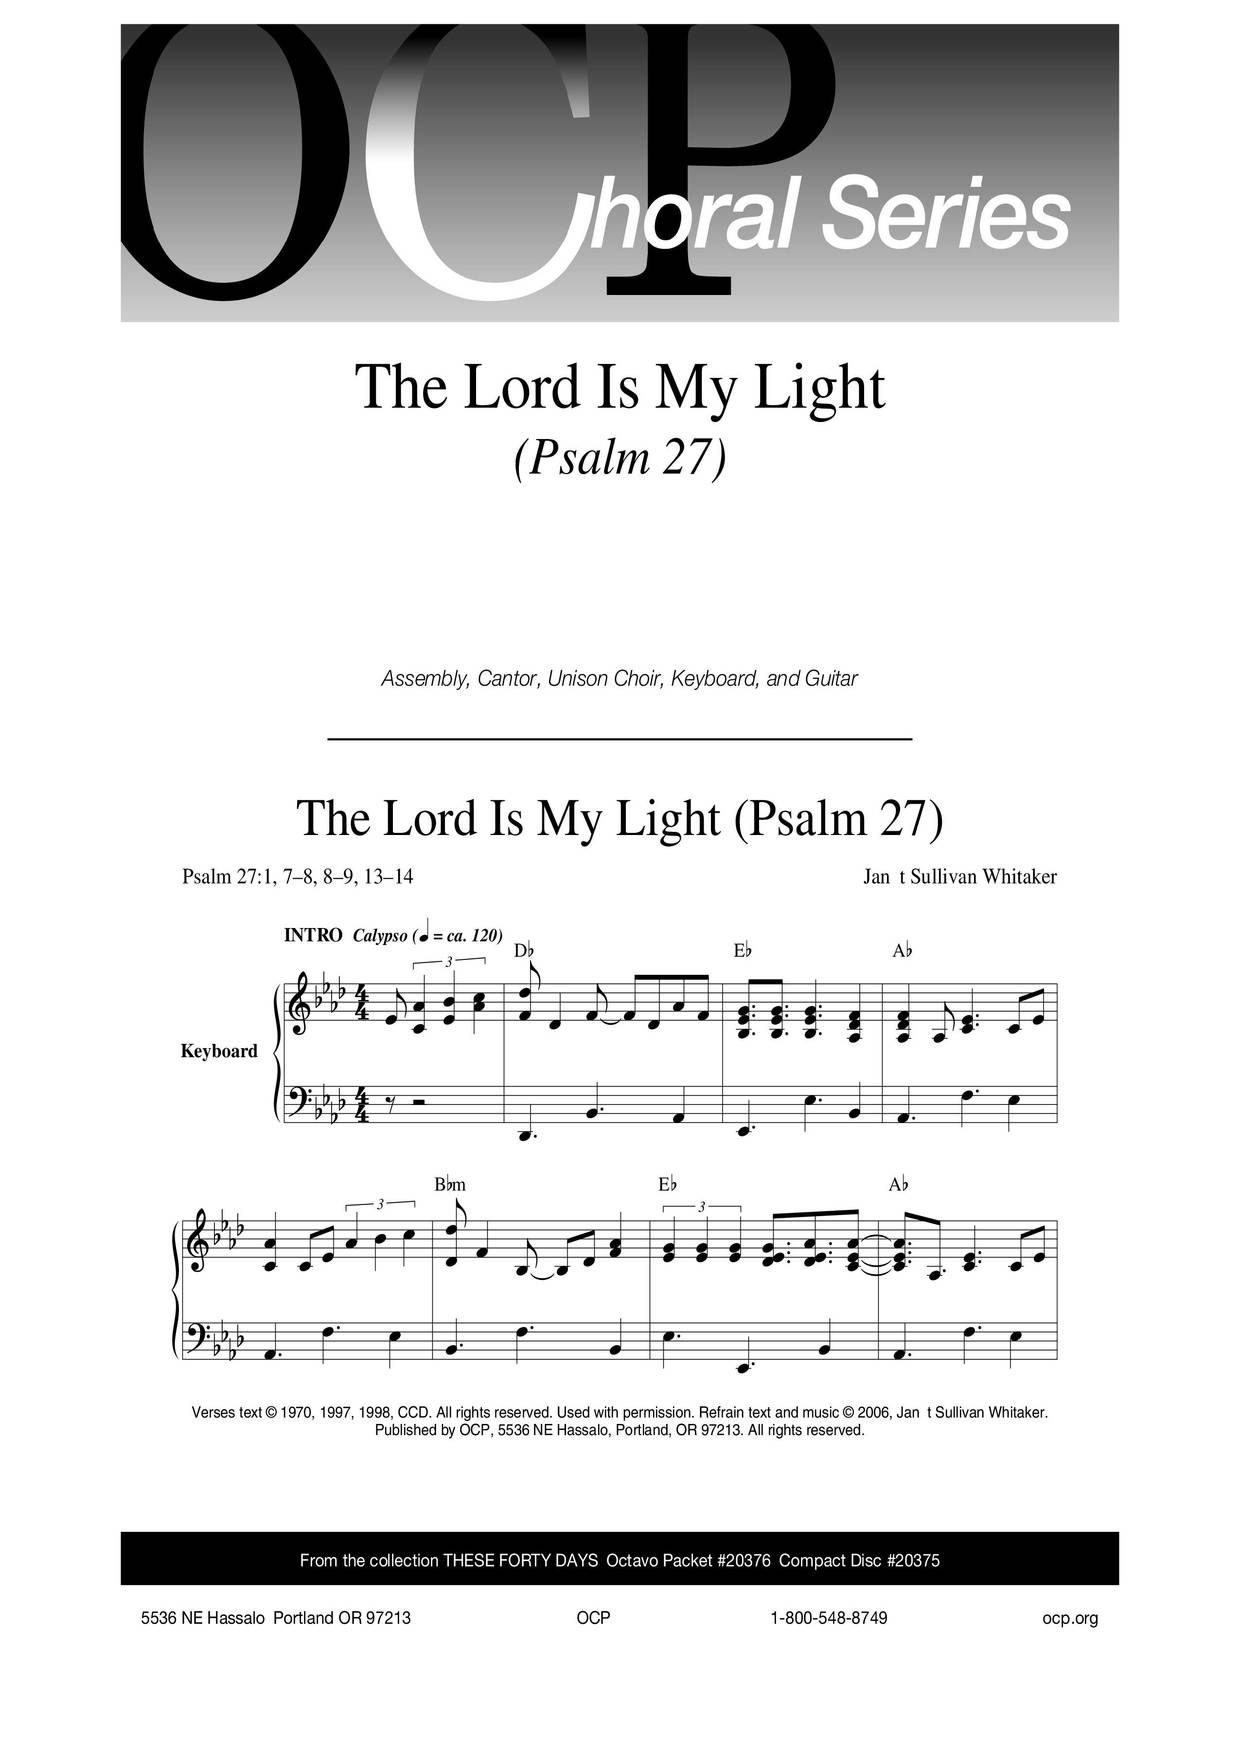 The Lord Is My Light (Psalm 27) Score